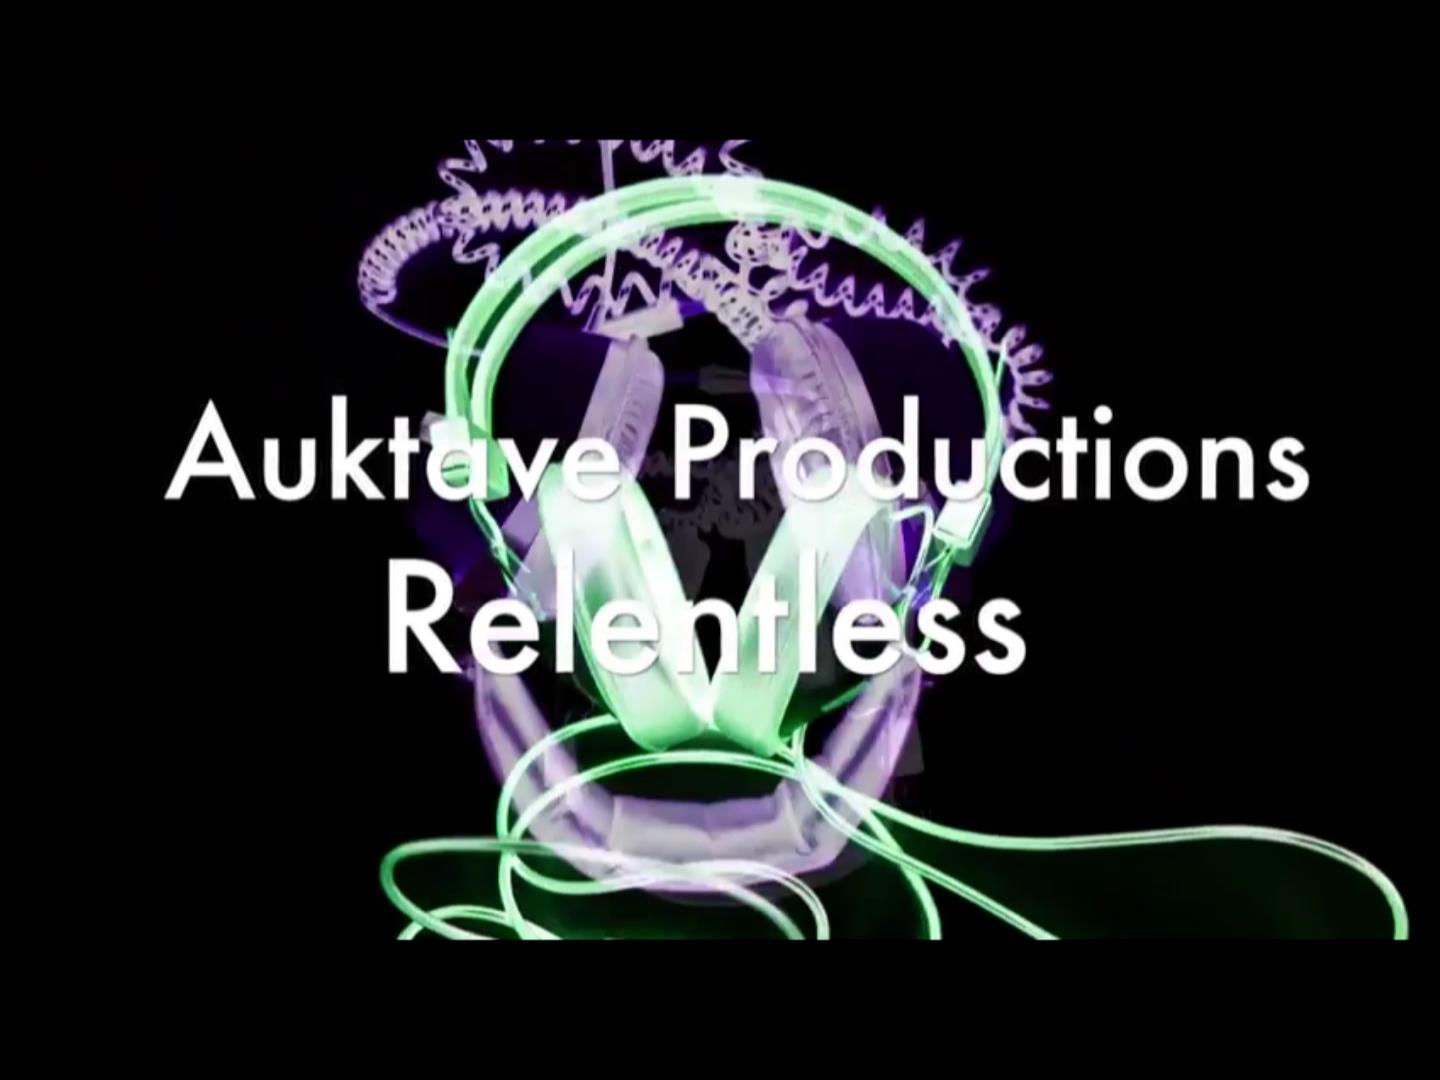  Auktave Productions – “Relentless”